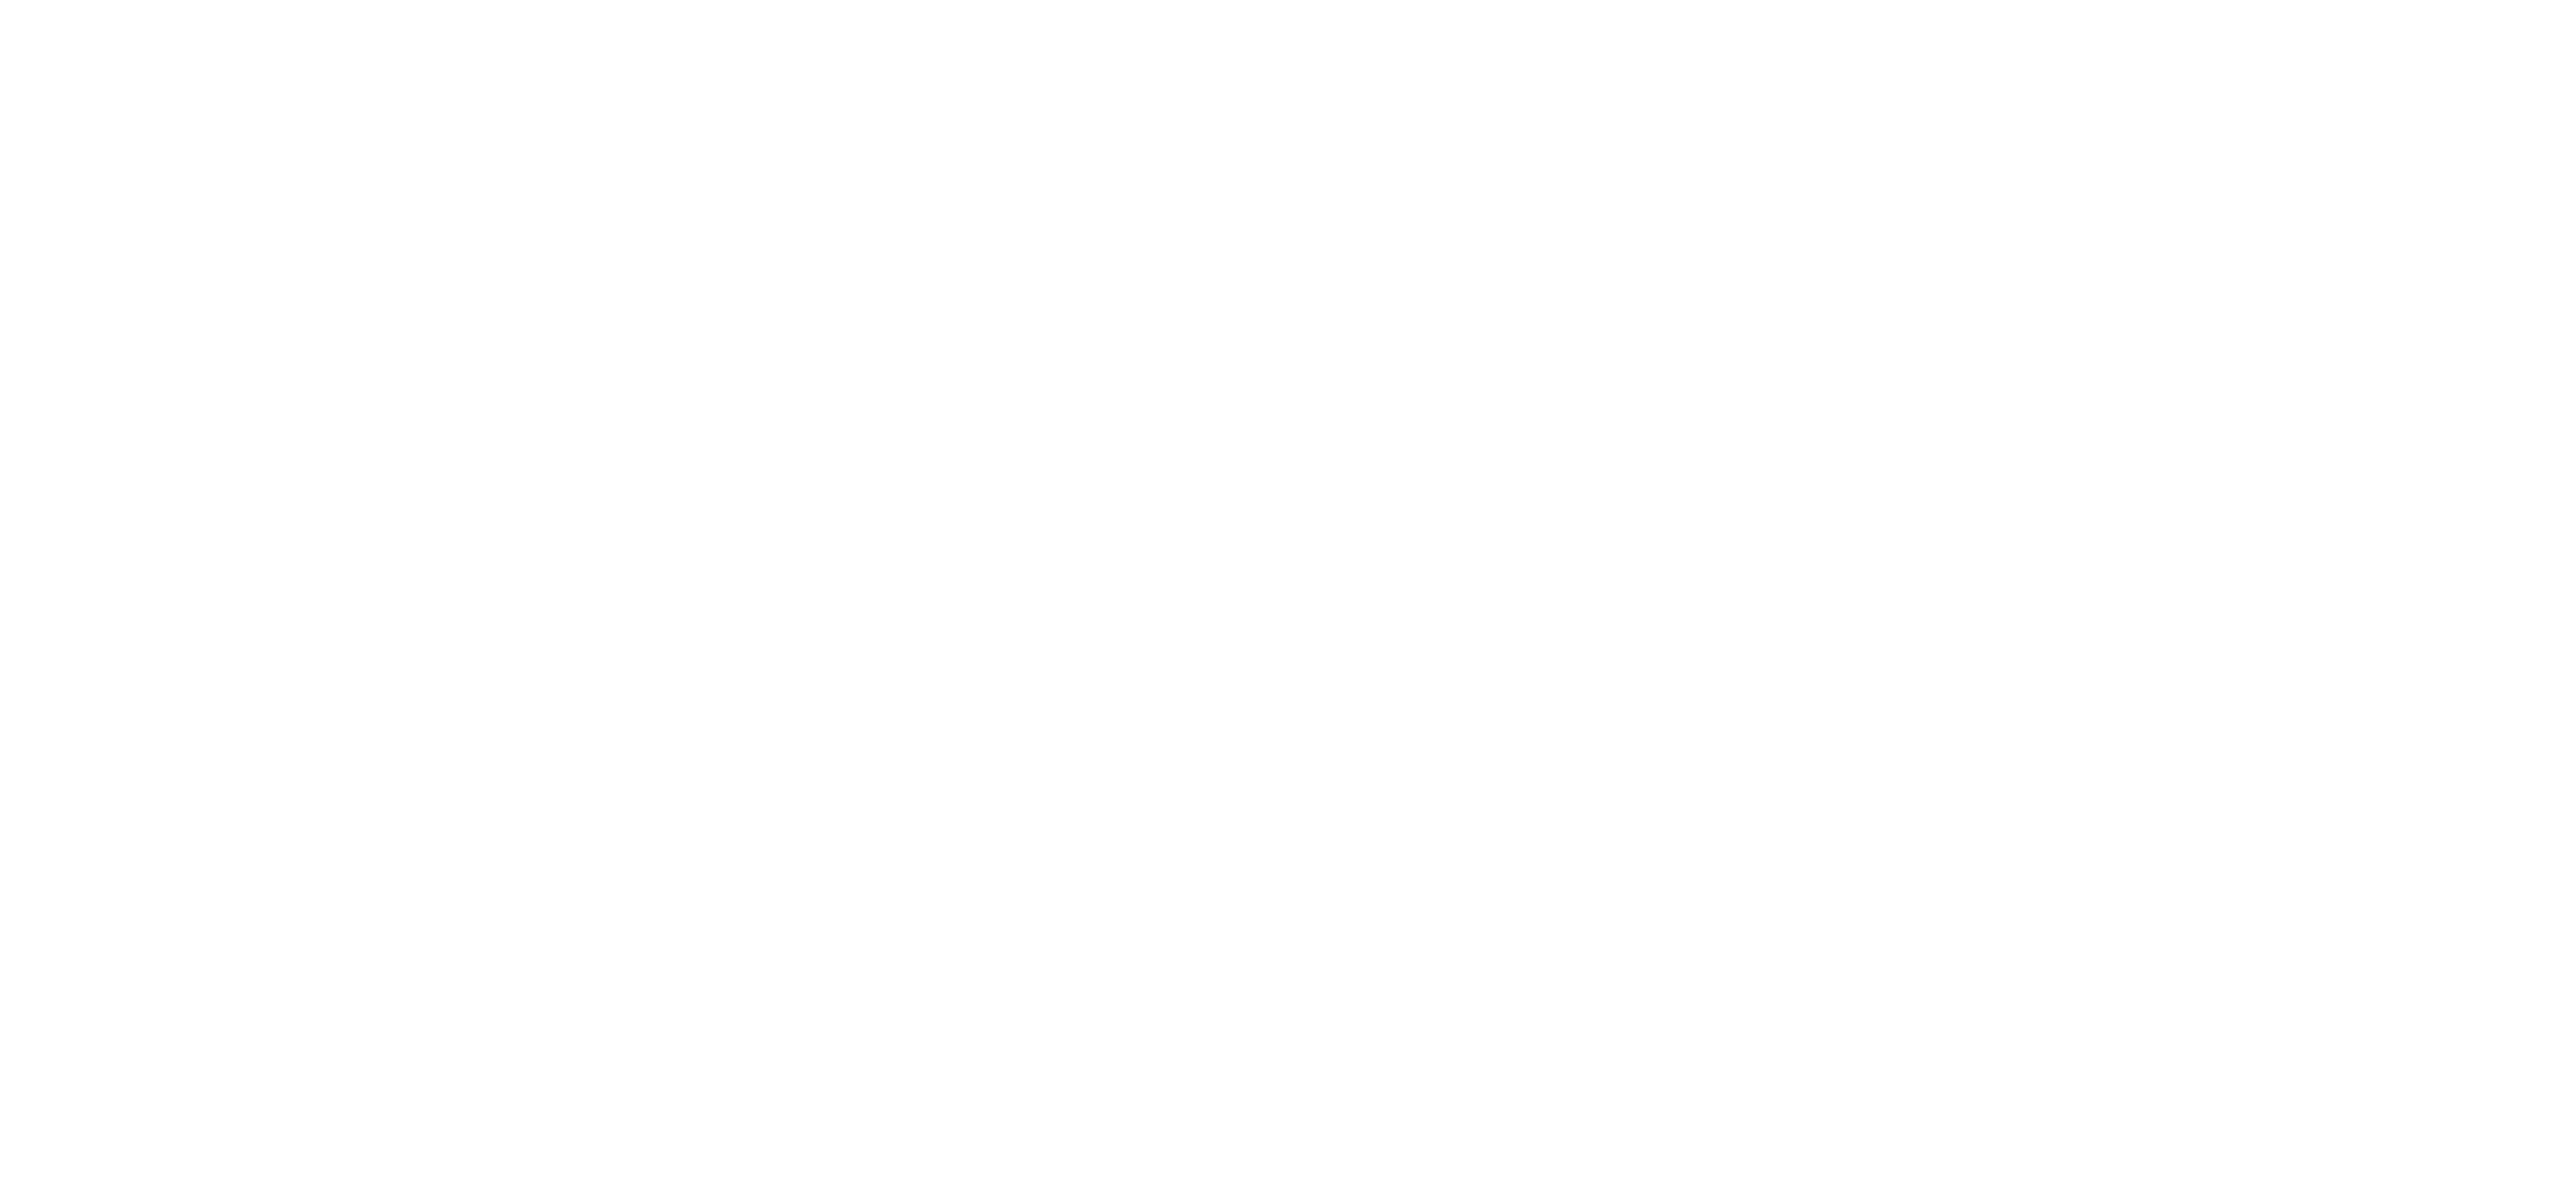 Town of Albion